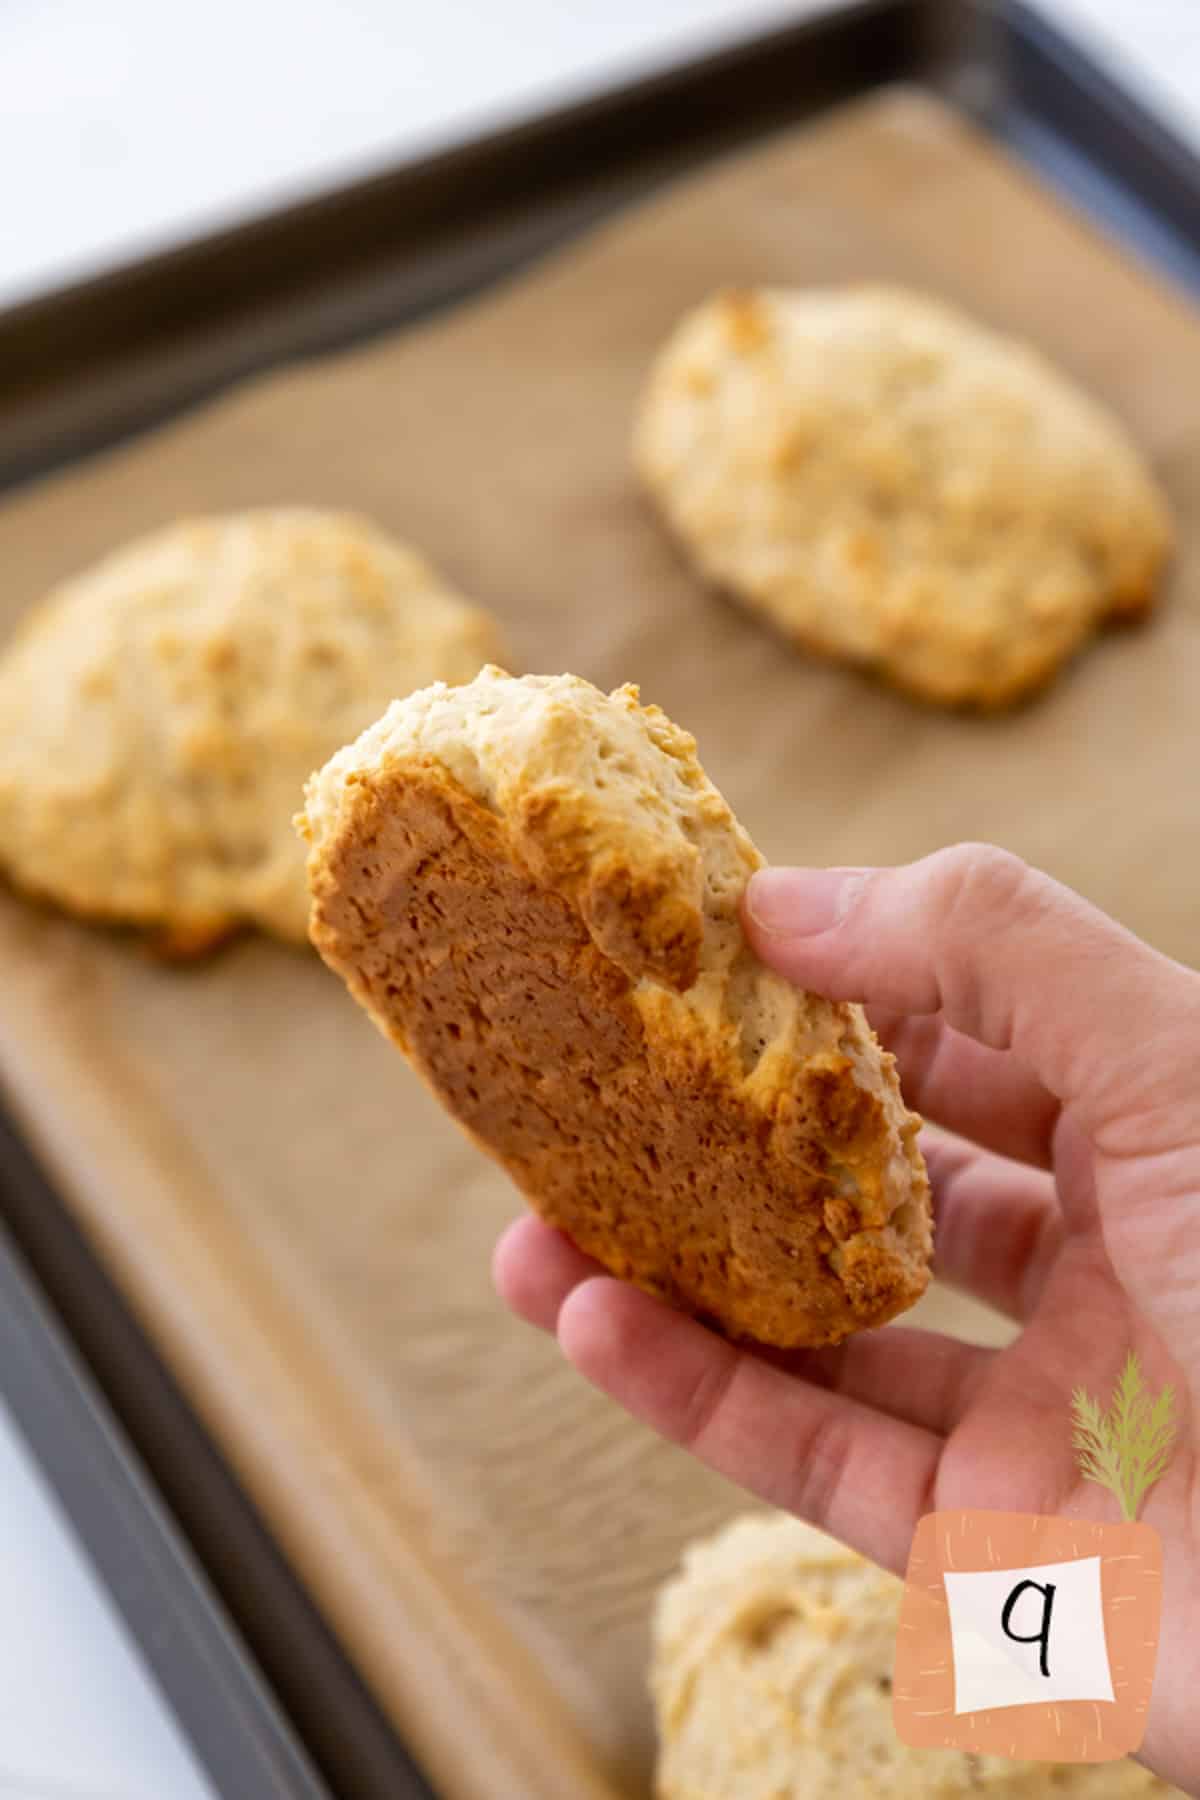 A hand holding a biscuit with a golden brown bottom over a baking sheet.